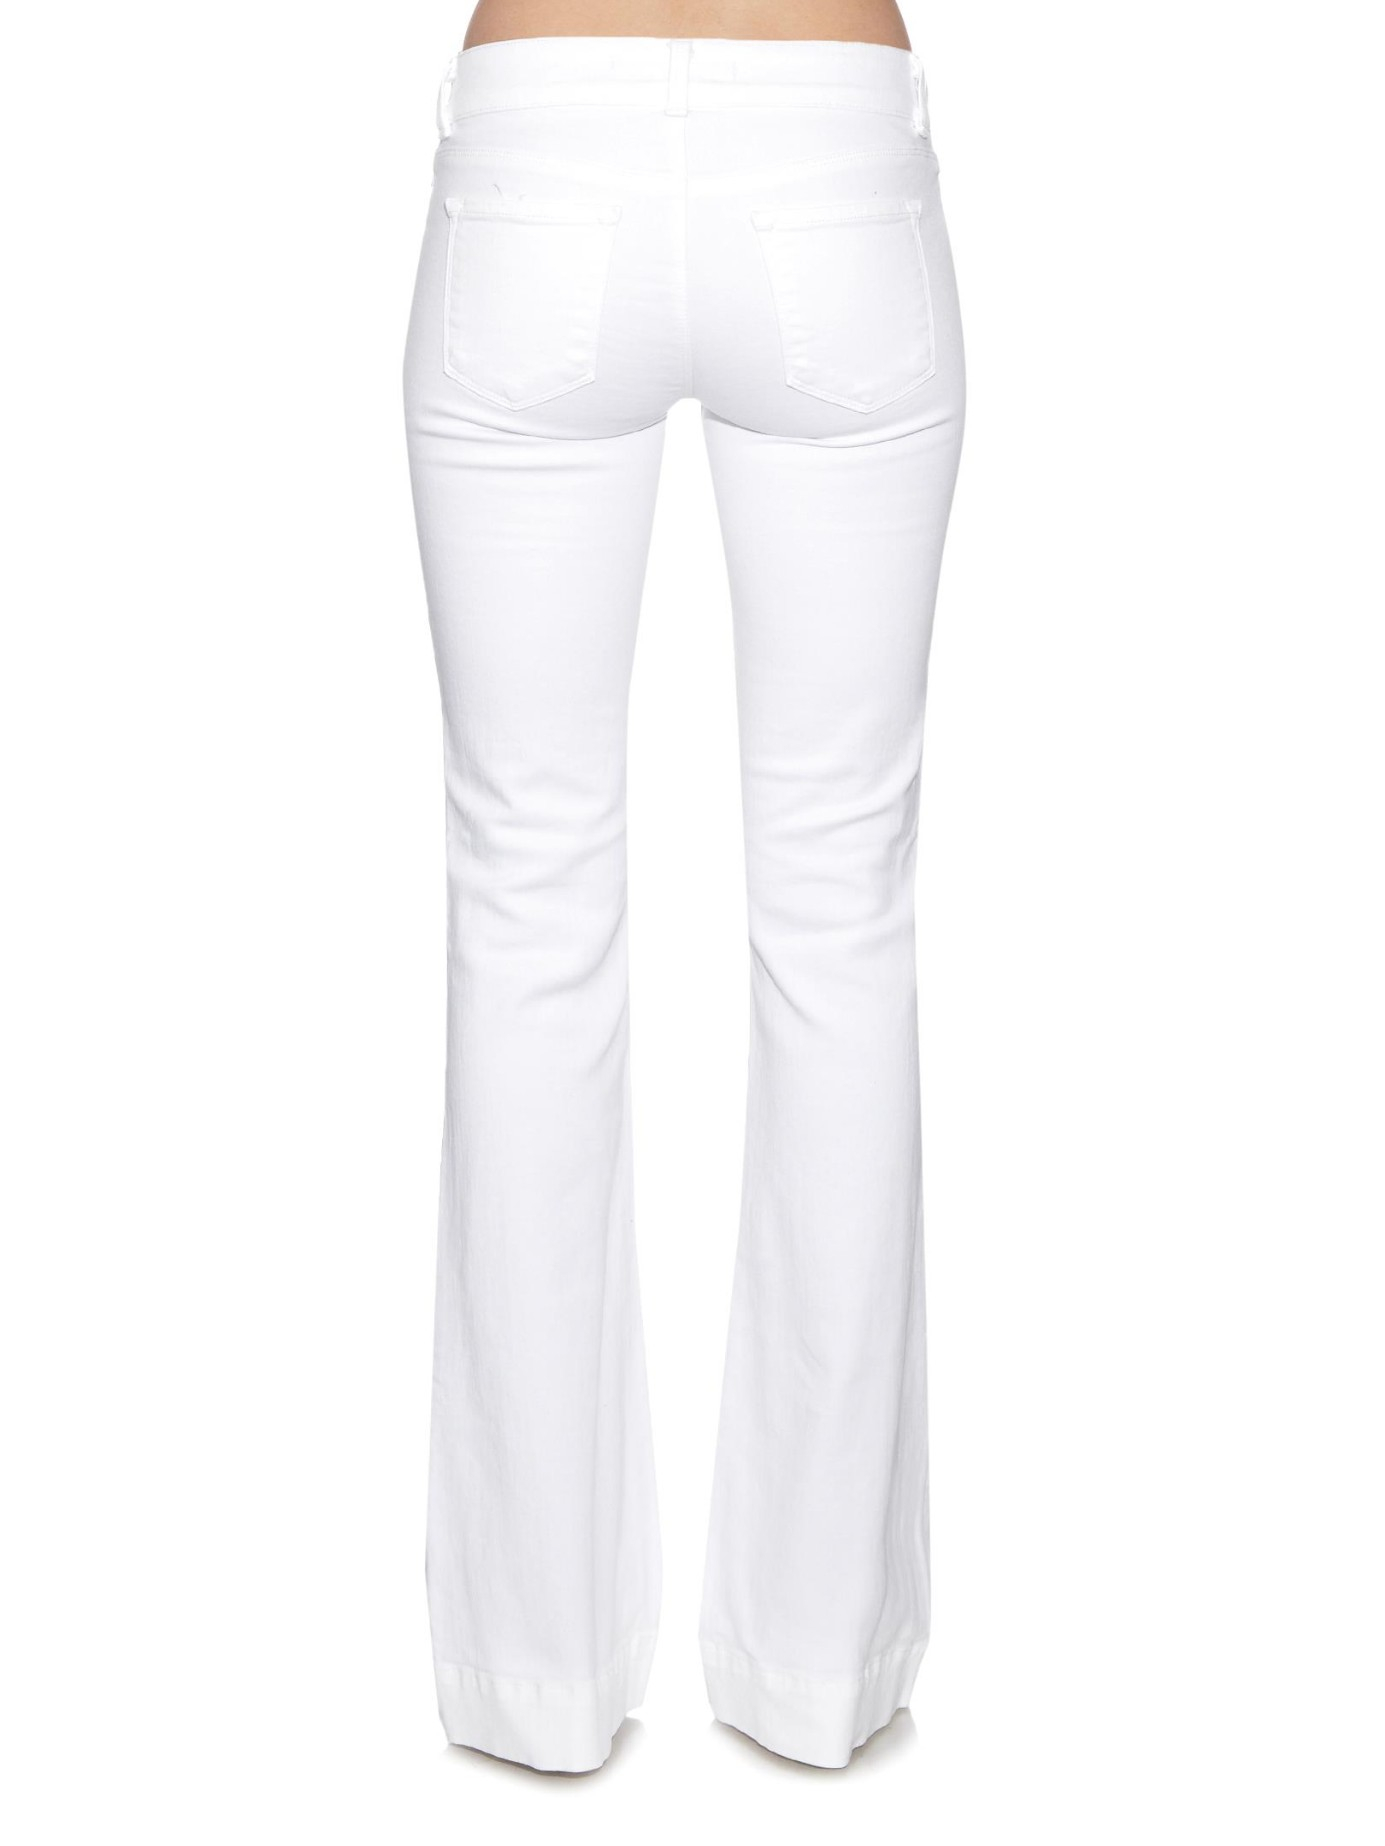 J Love Story Low-rise Flared Jeans White | Lyst